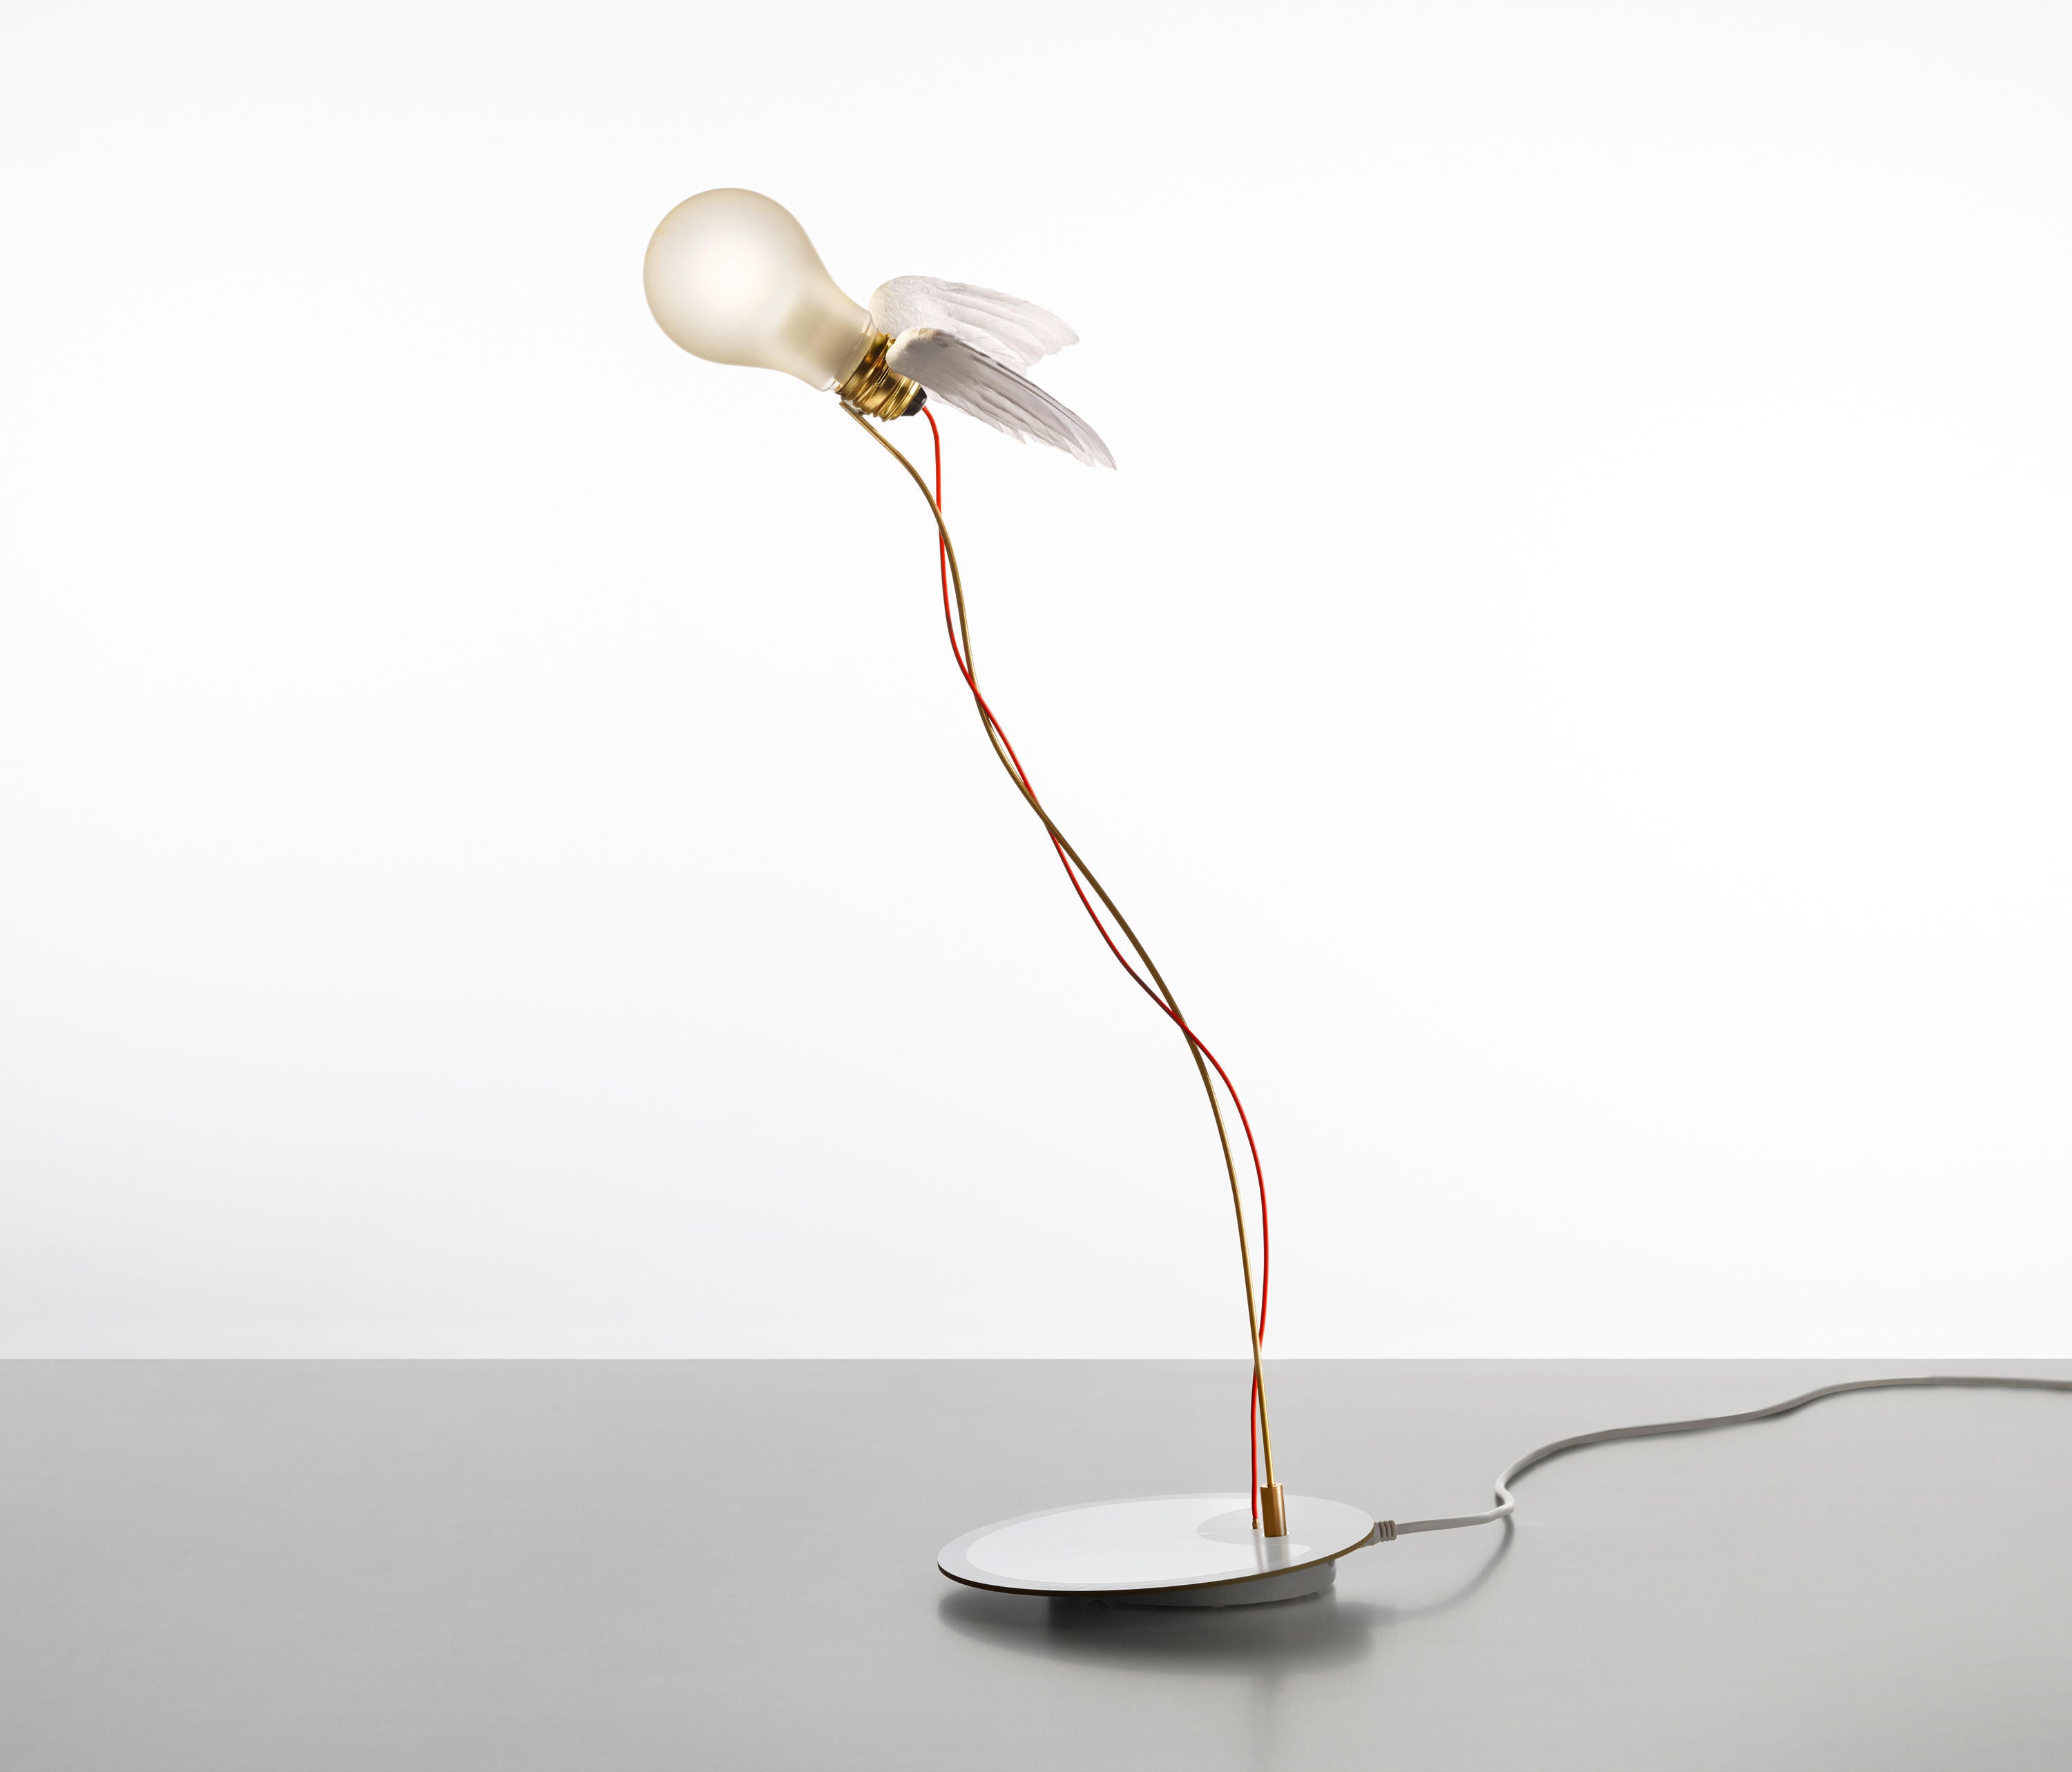 A desk lamp in the form of a bulb flying through the air. Is it the angel of light?